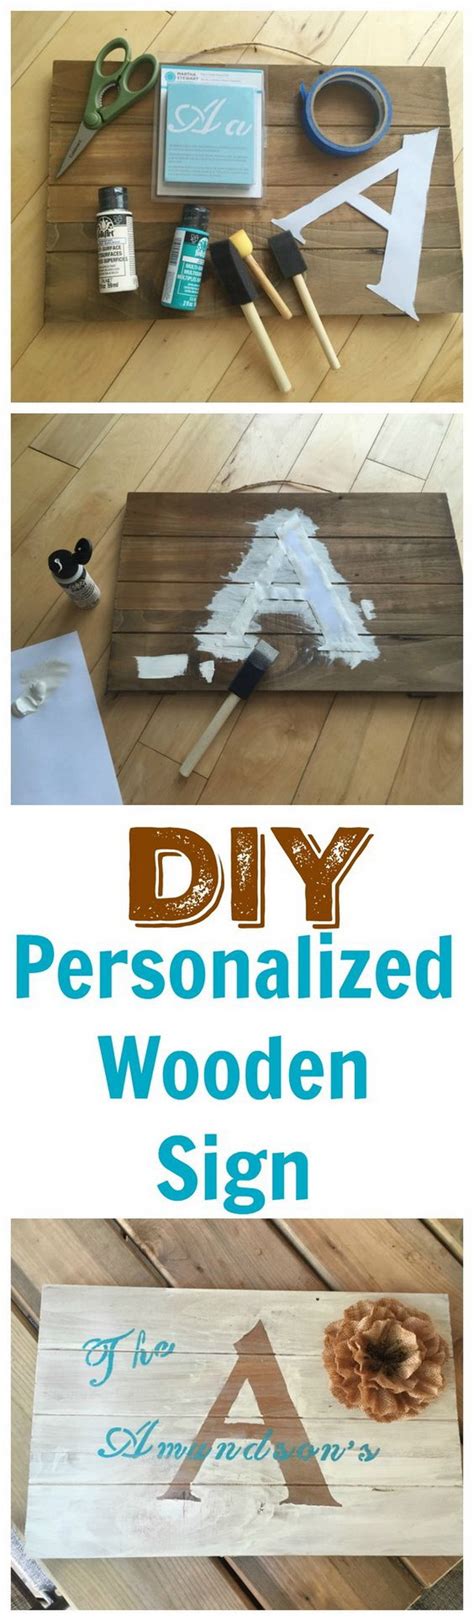 Easy Weekend Diy Projects To Improve Your Home Listing More